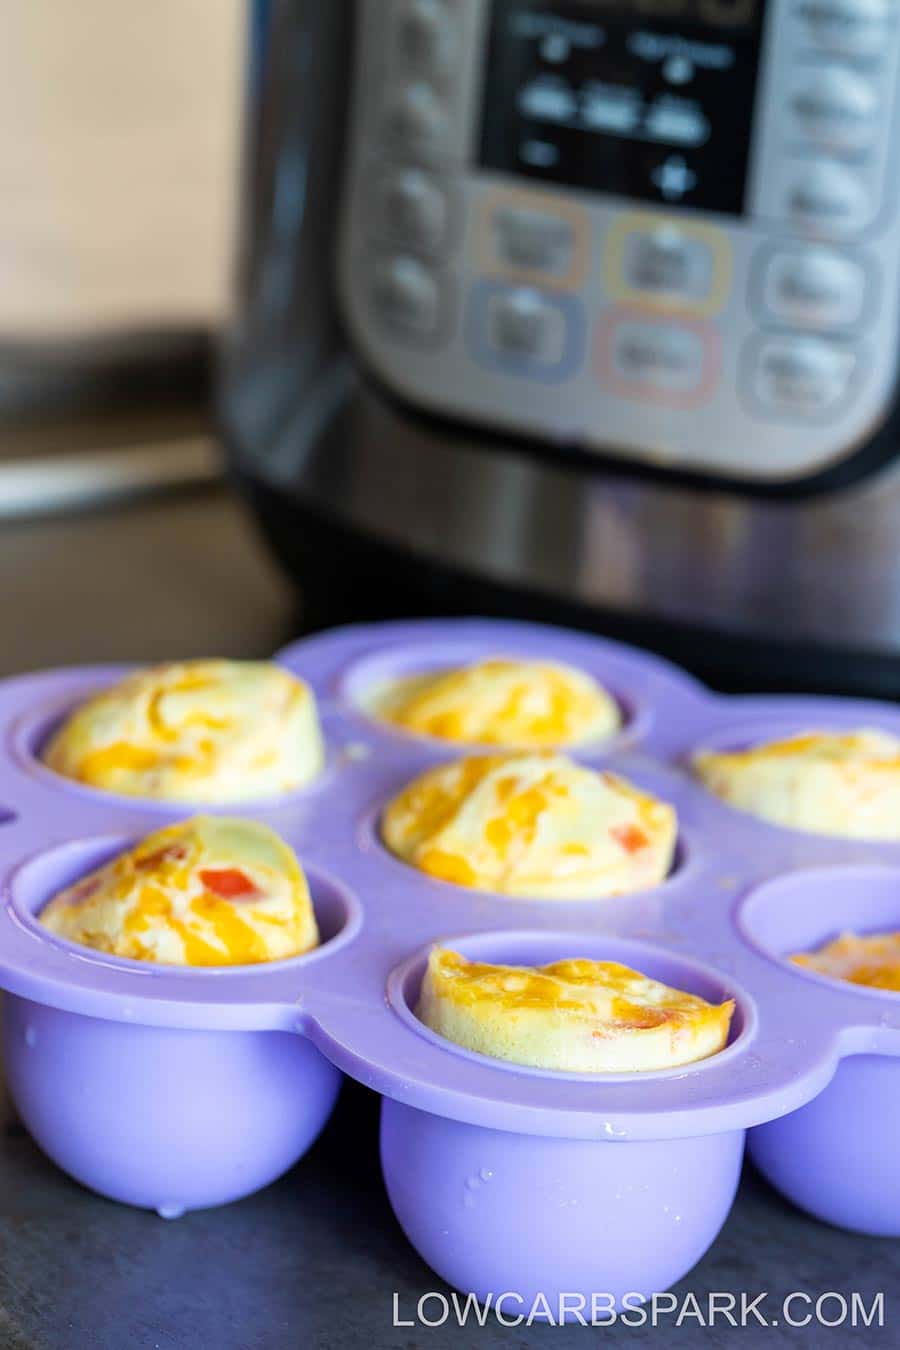 https://www.lowcarbspark.com/wp-content/uploads/2021/09/how-to-make-egg-bites-in-the-instant-pot.jpg